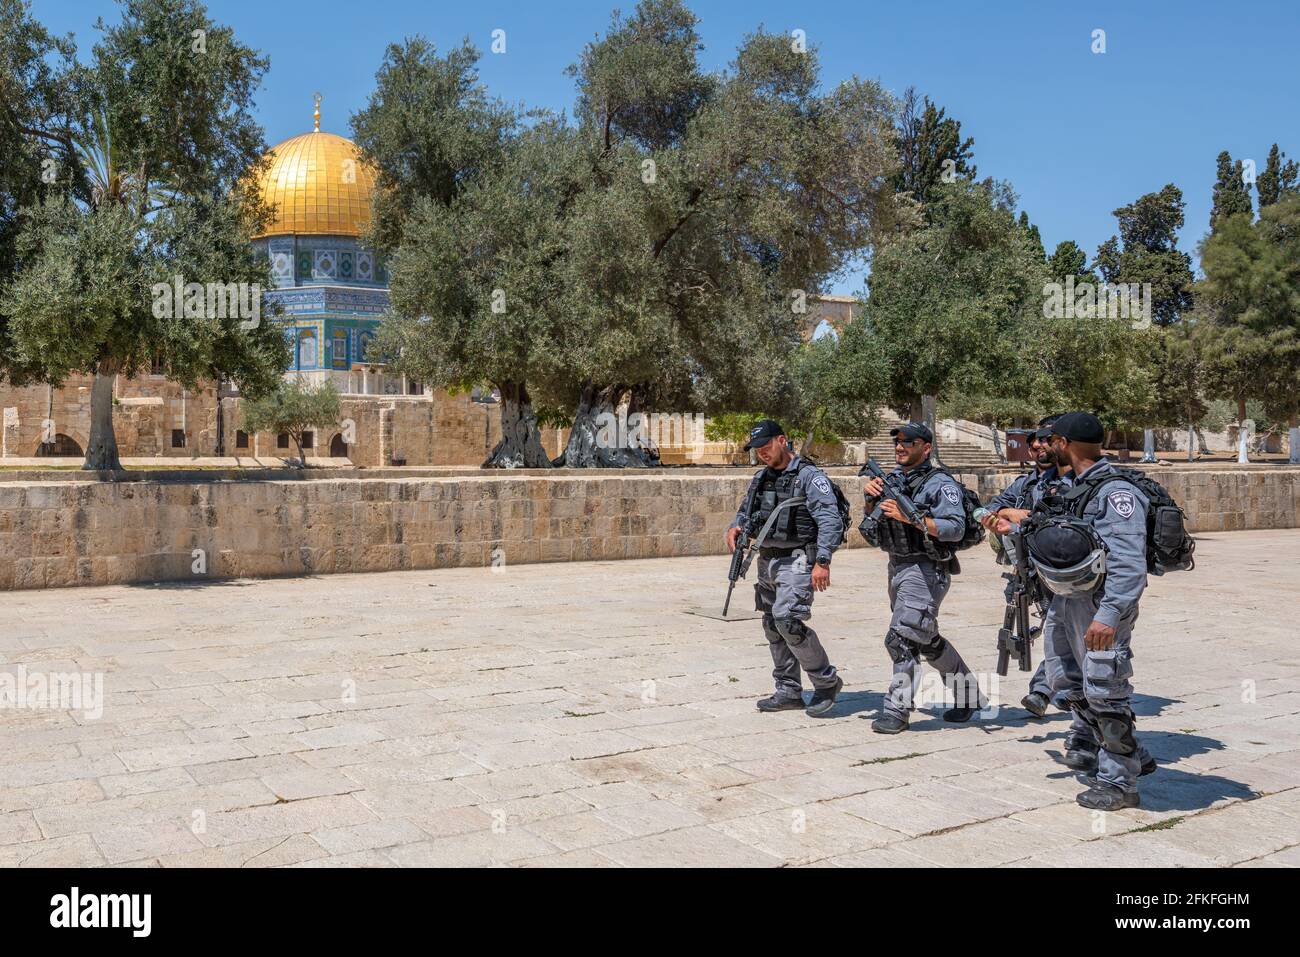 East Jerusalem, Israel - April 28th, 2021: Heavily armed Israeli security forces walking by the dome of the rock, Jerusalem, Israel. Stock Photo